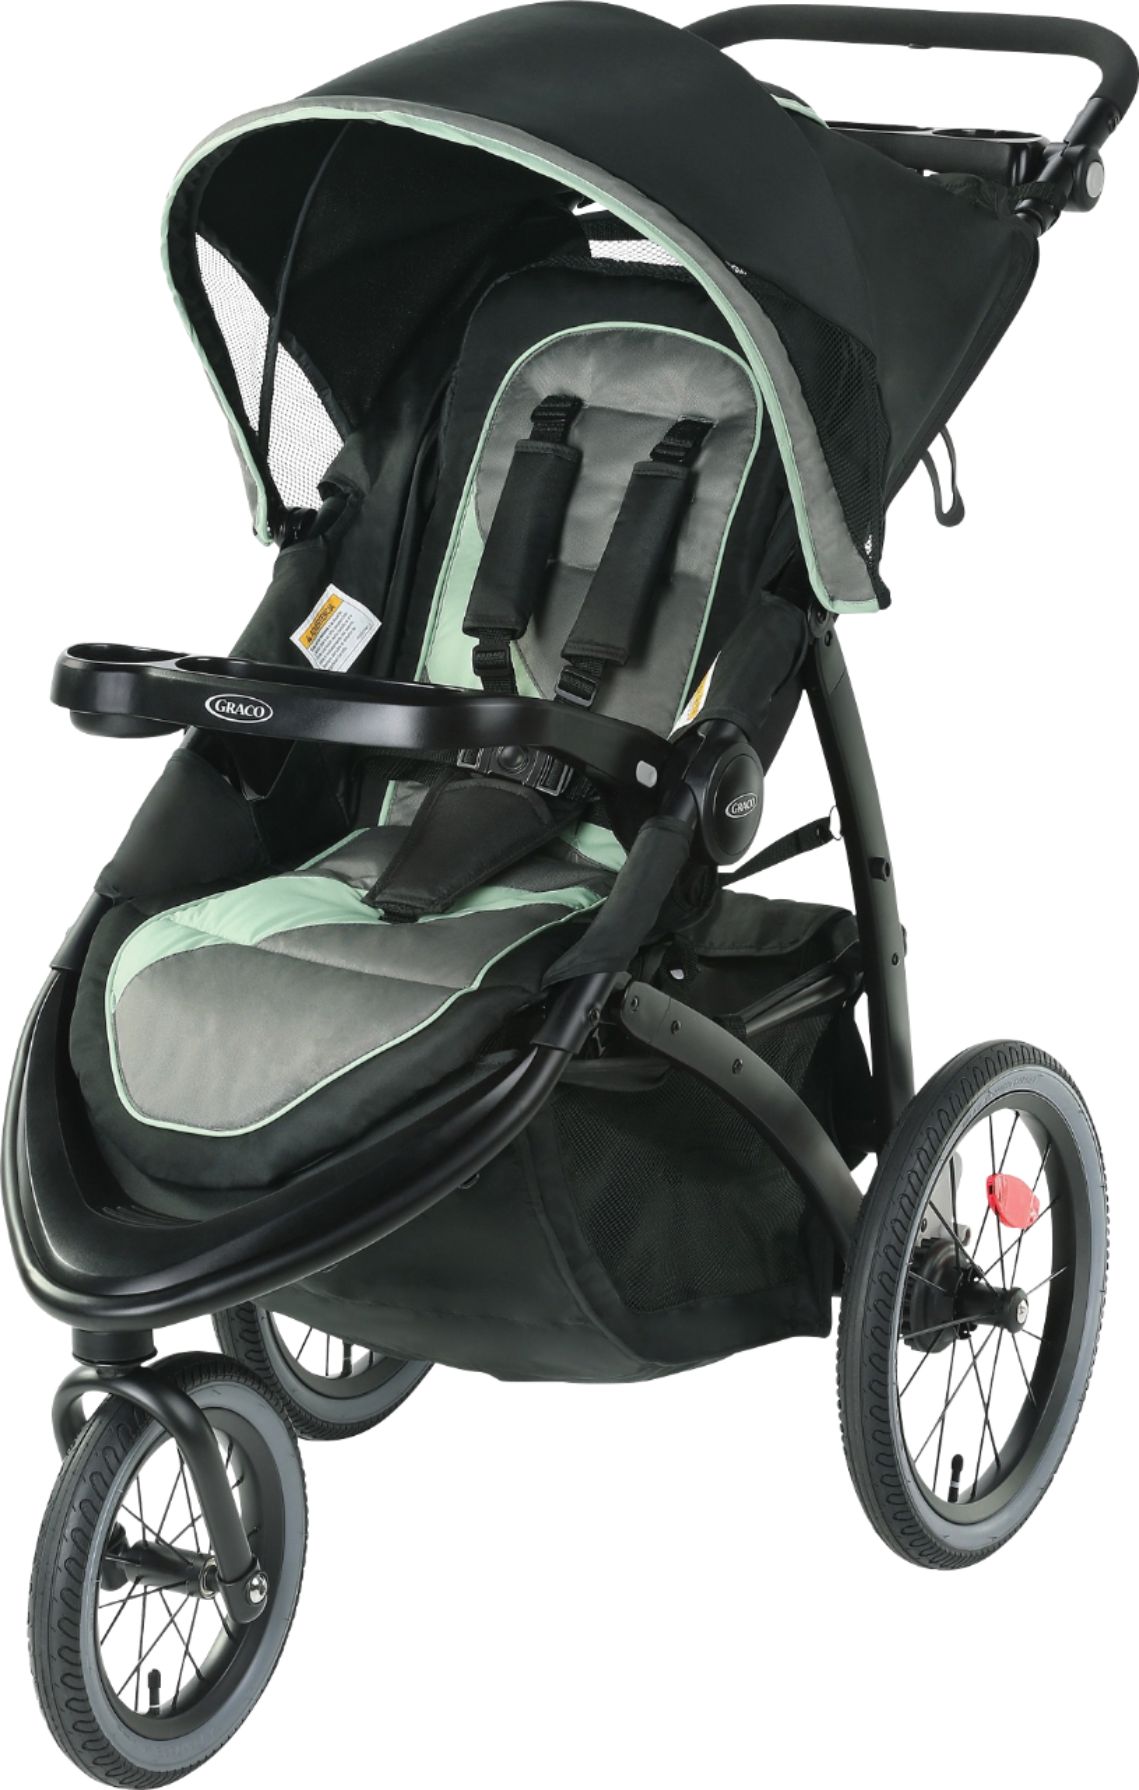 graco jogging stroller and carseat